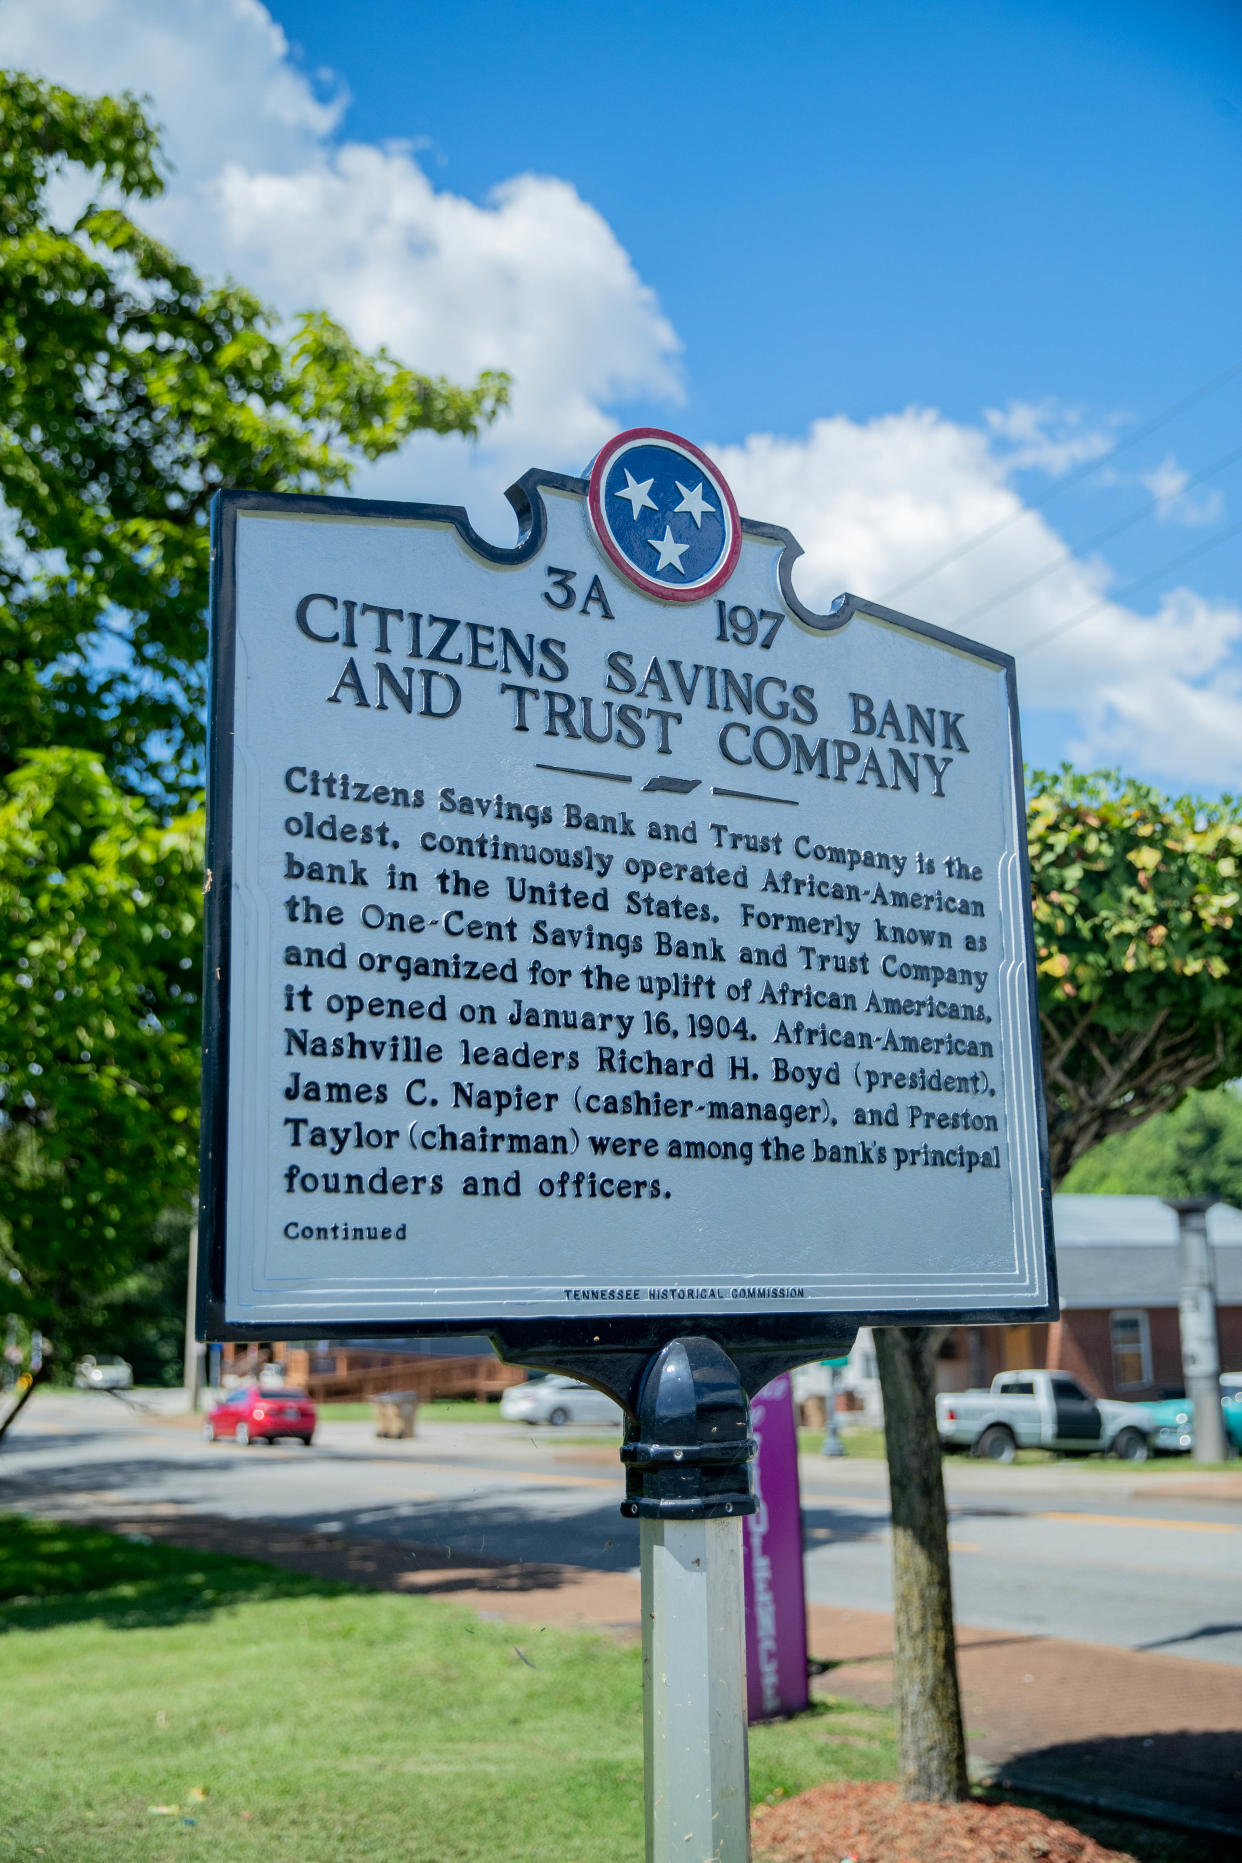 The Citizens Bank historic marker documents the history of the Black-owned bank, founded in 1904.